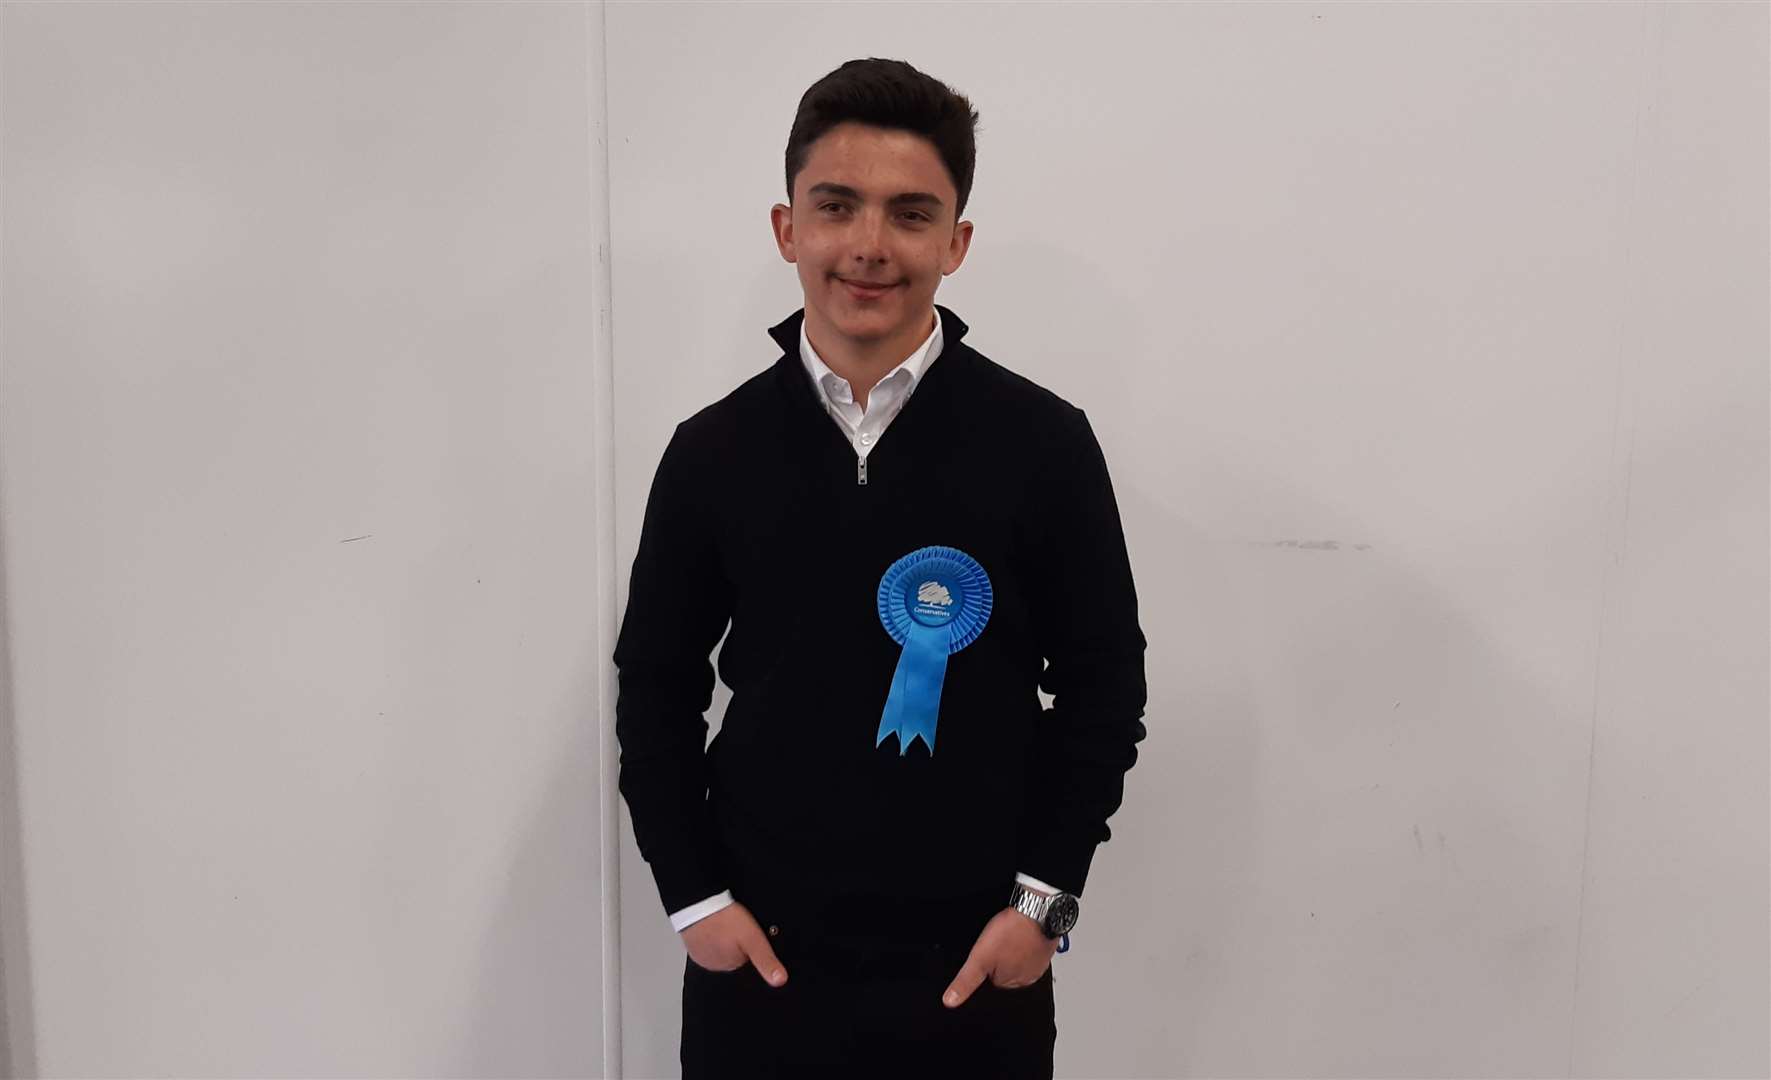 Stan Forecast, a University student who has been elected to represent Allington